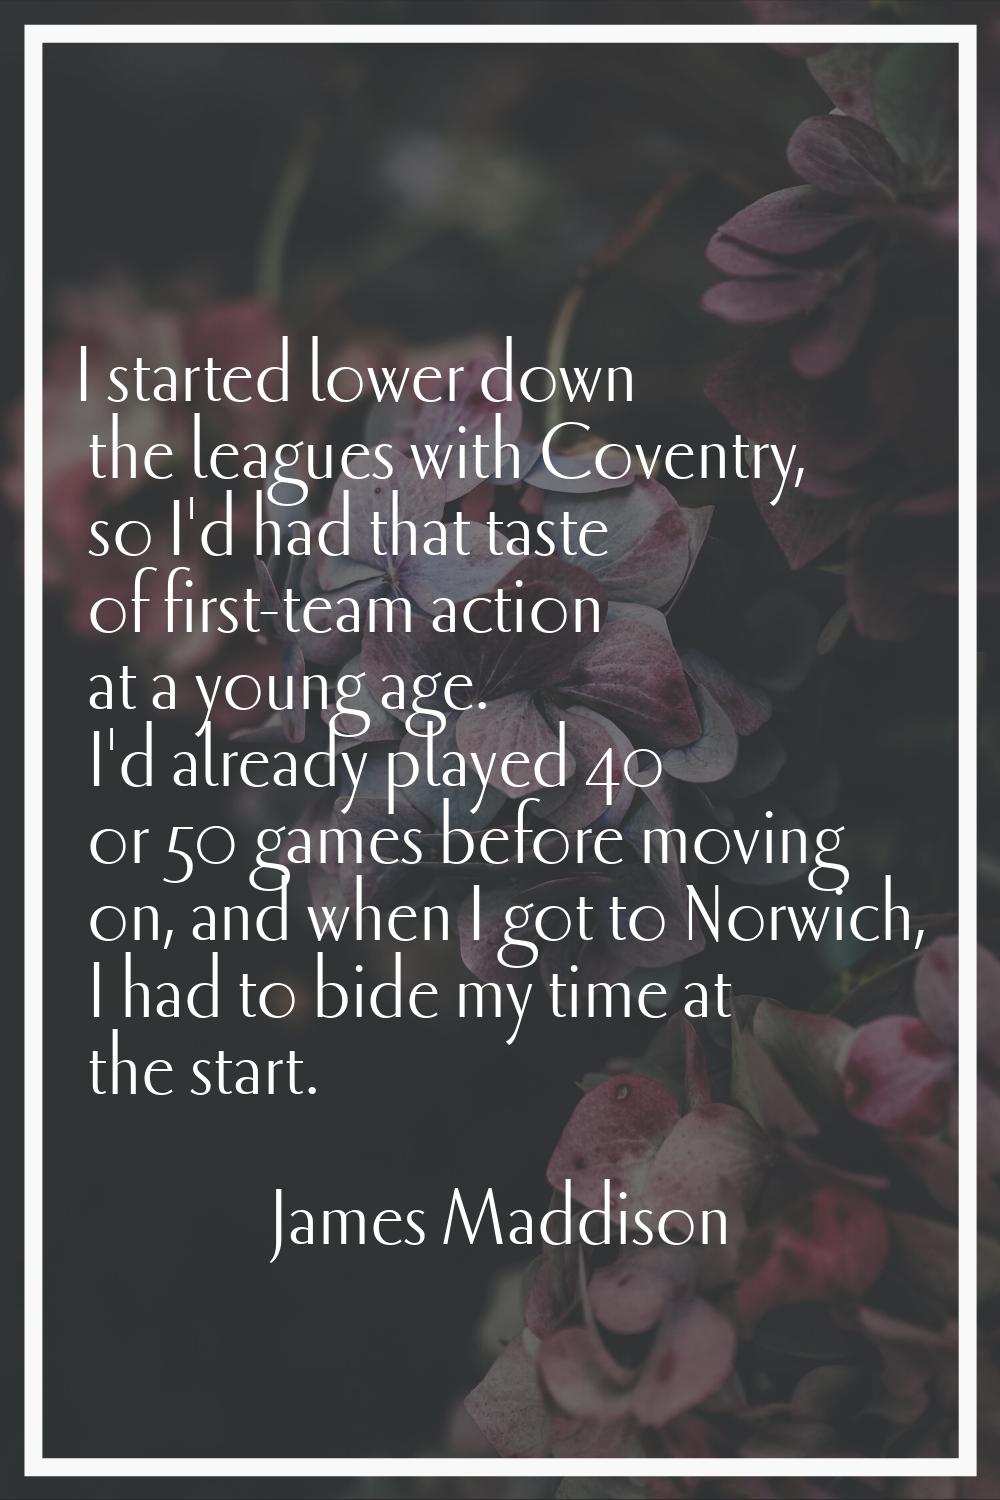 I started lower down the leagues with Coventry, so I'd had that taste of first-team action at a you